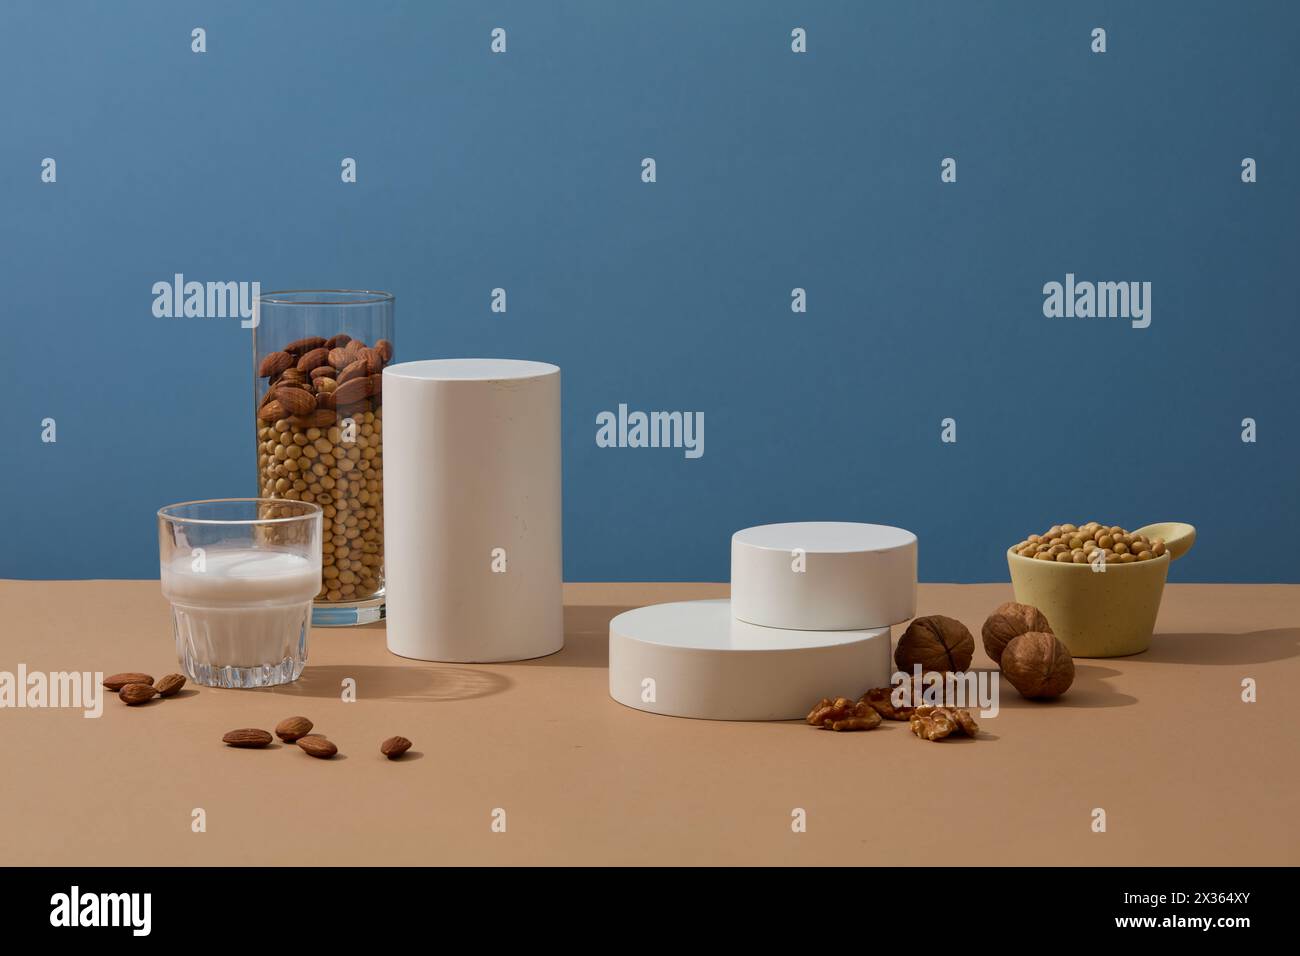 Minimal scene with geometric shaped podiums displayed with a cup of milk, a bowl of soybeans, almonds and walnuts. Stage showcase on pedestal display Stock Photo